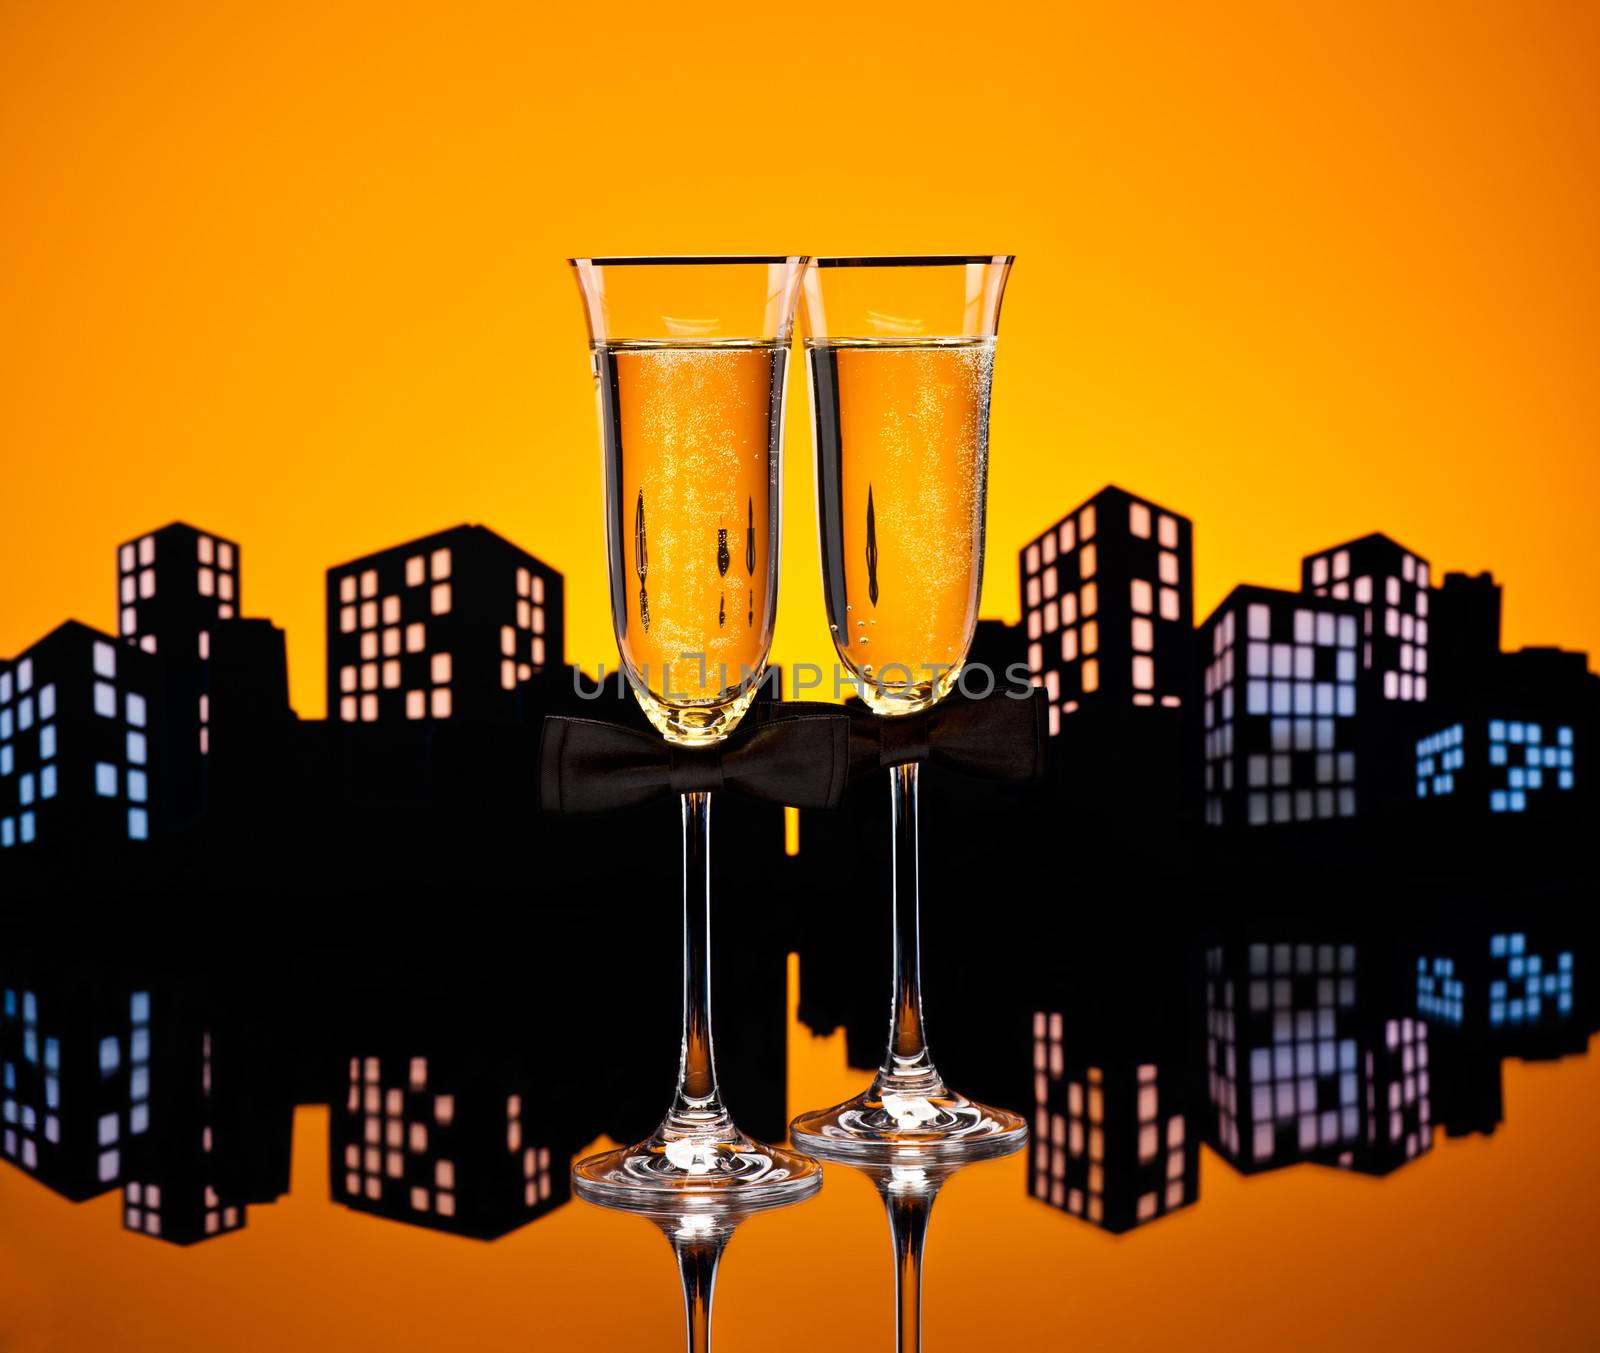 Metropolis champagne glasses with conceptual same sex decoration for gay men
